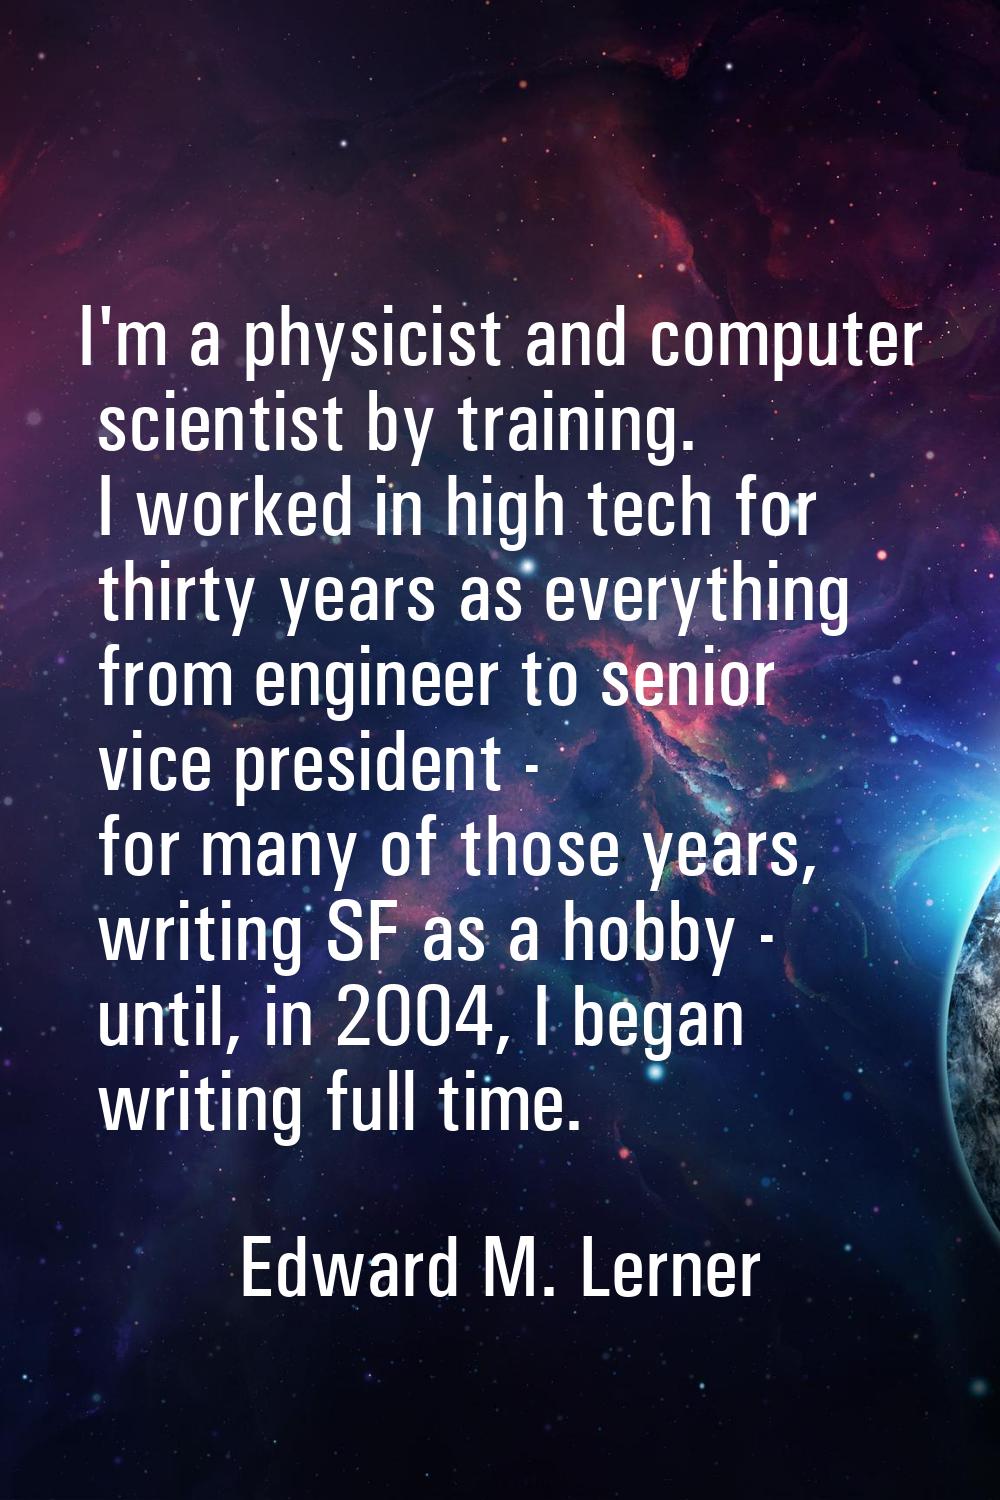 I'm a physicist and computer scientist by training. I worked in high tech for thirty years as every